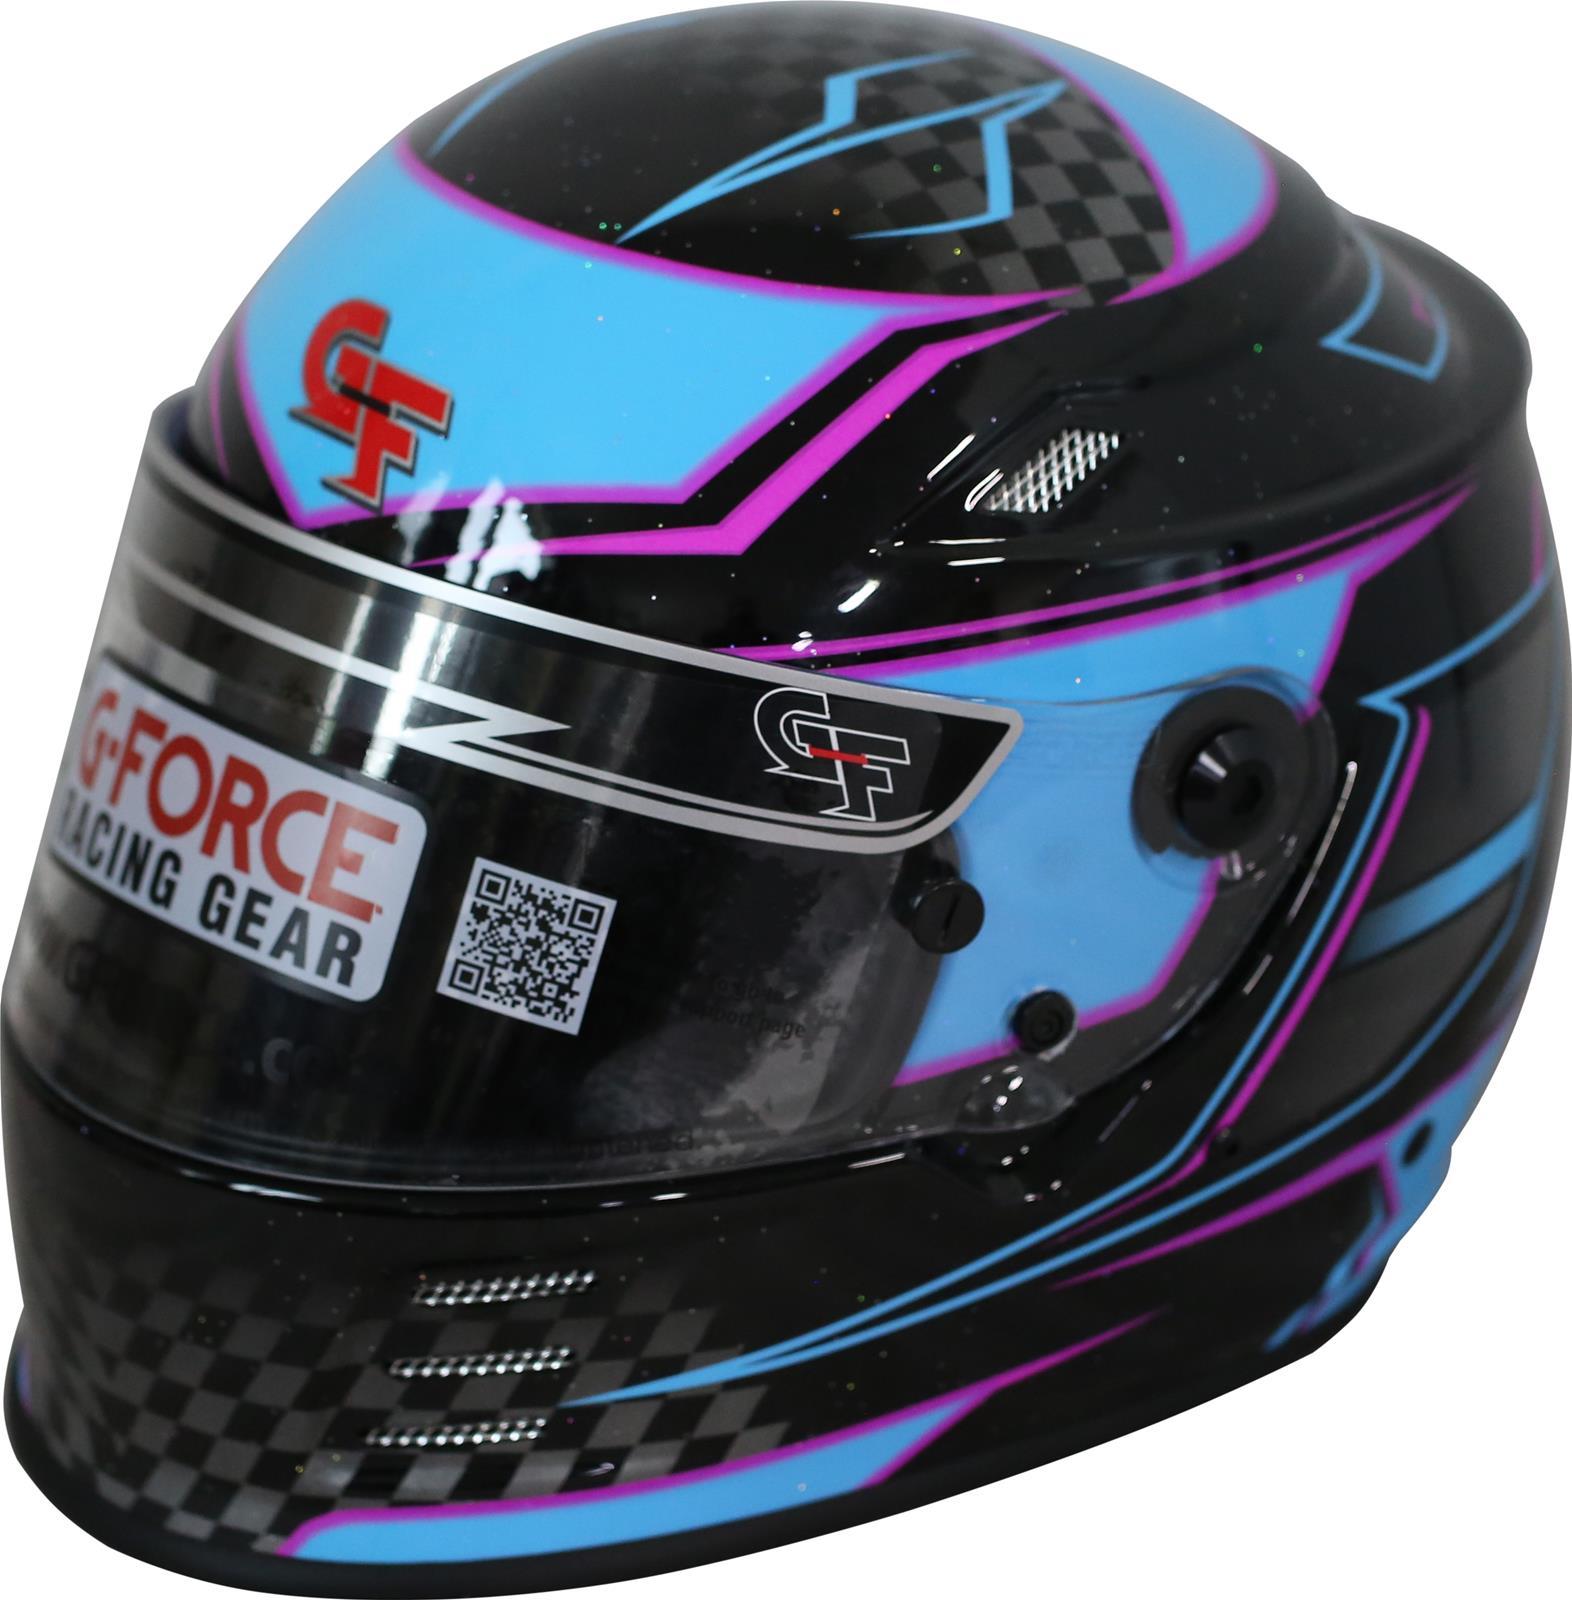 G-Force Racing Gear 13005XLGBU Helmet, Revo Graphics, Full Face, Snell SA2020, Head and Neck Support Ready, Black / Blue, X-Large, Each